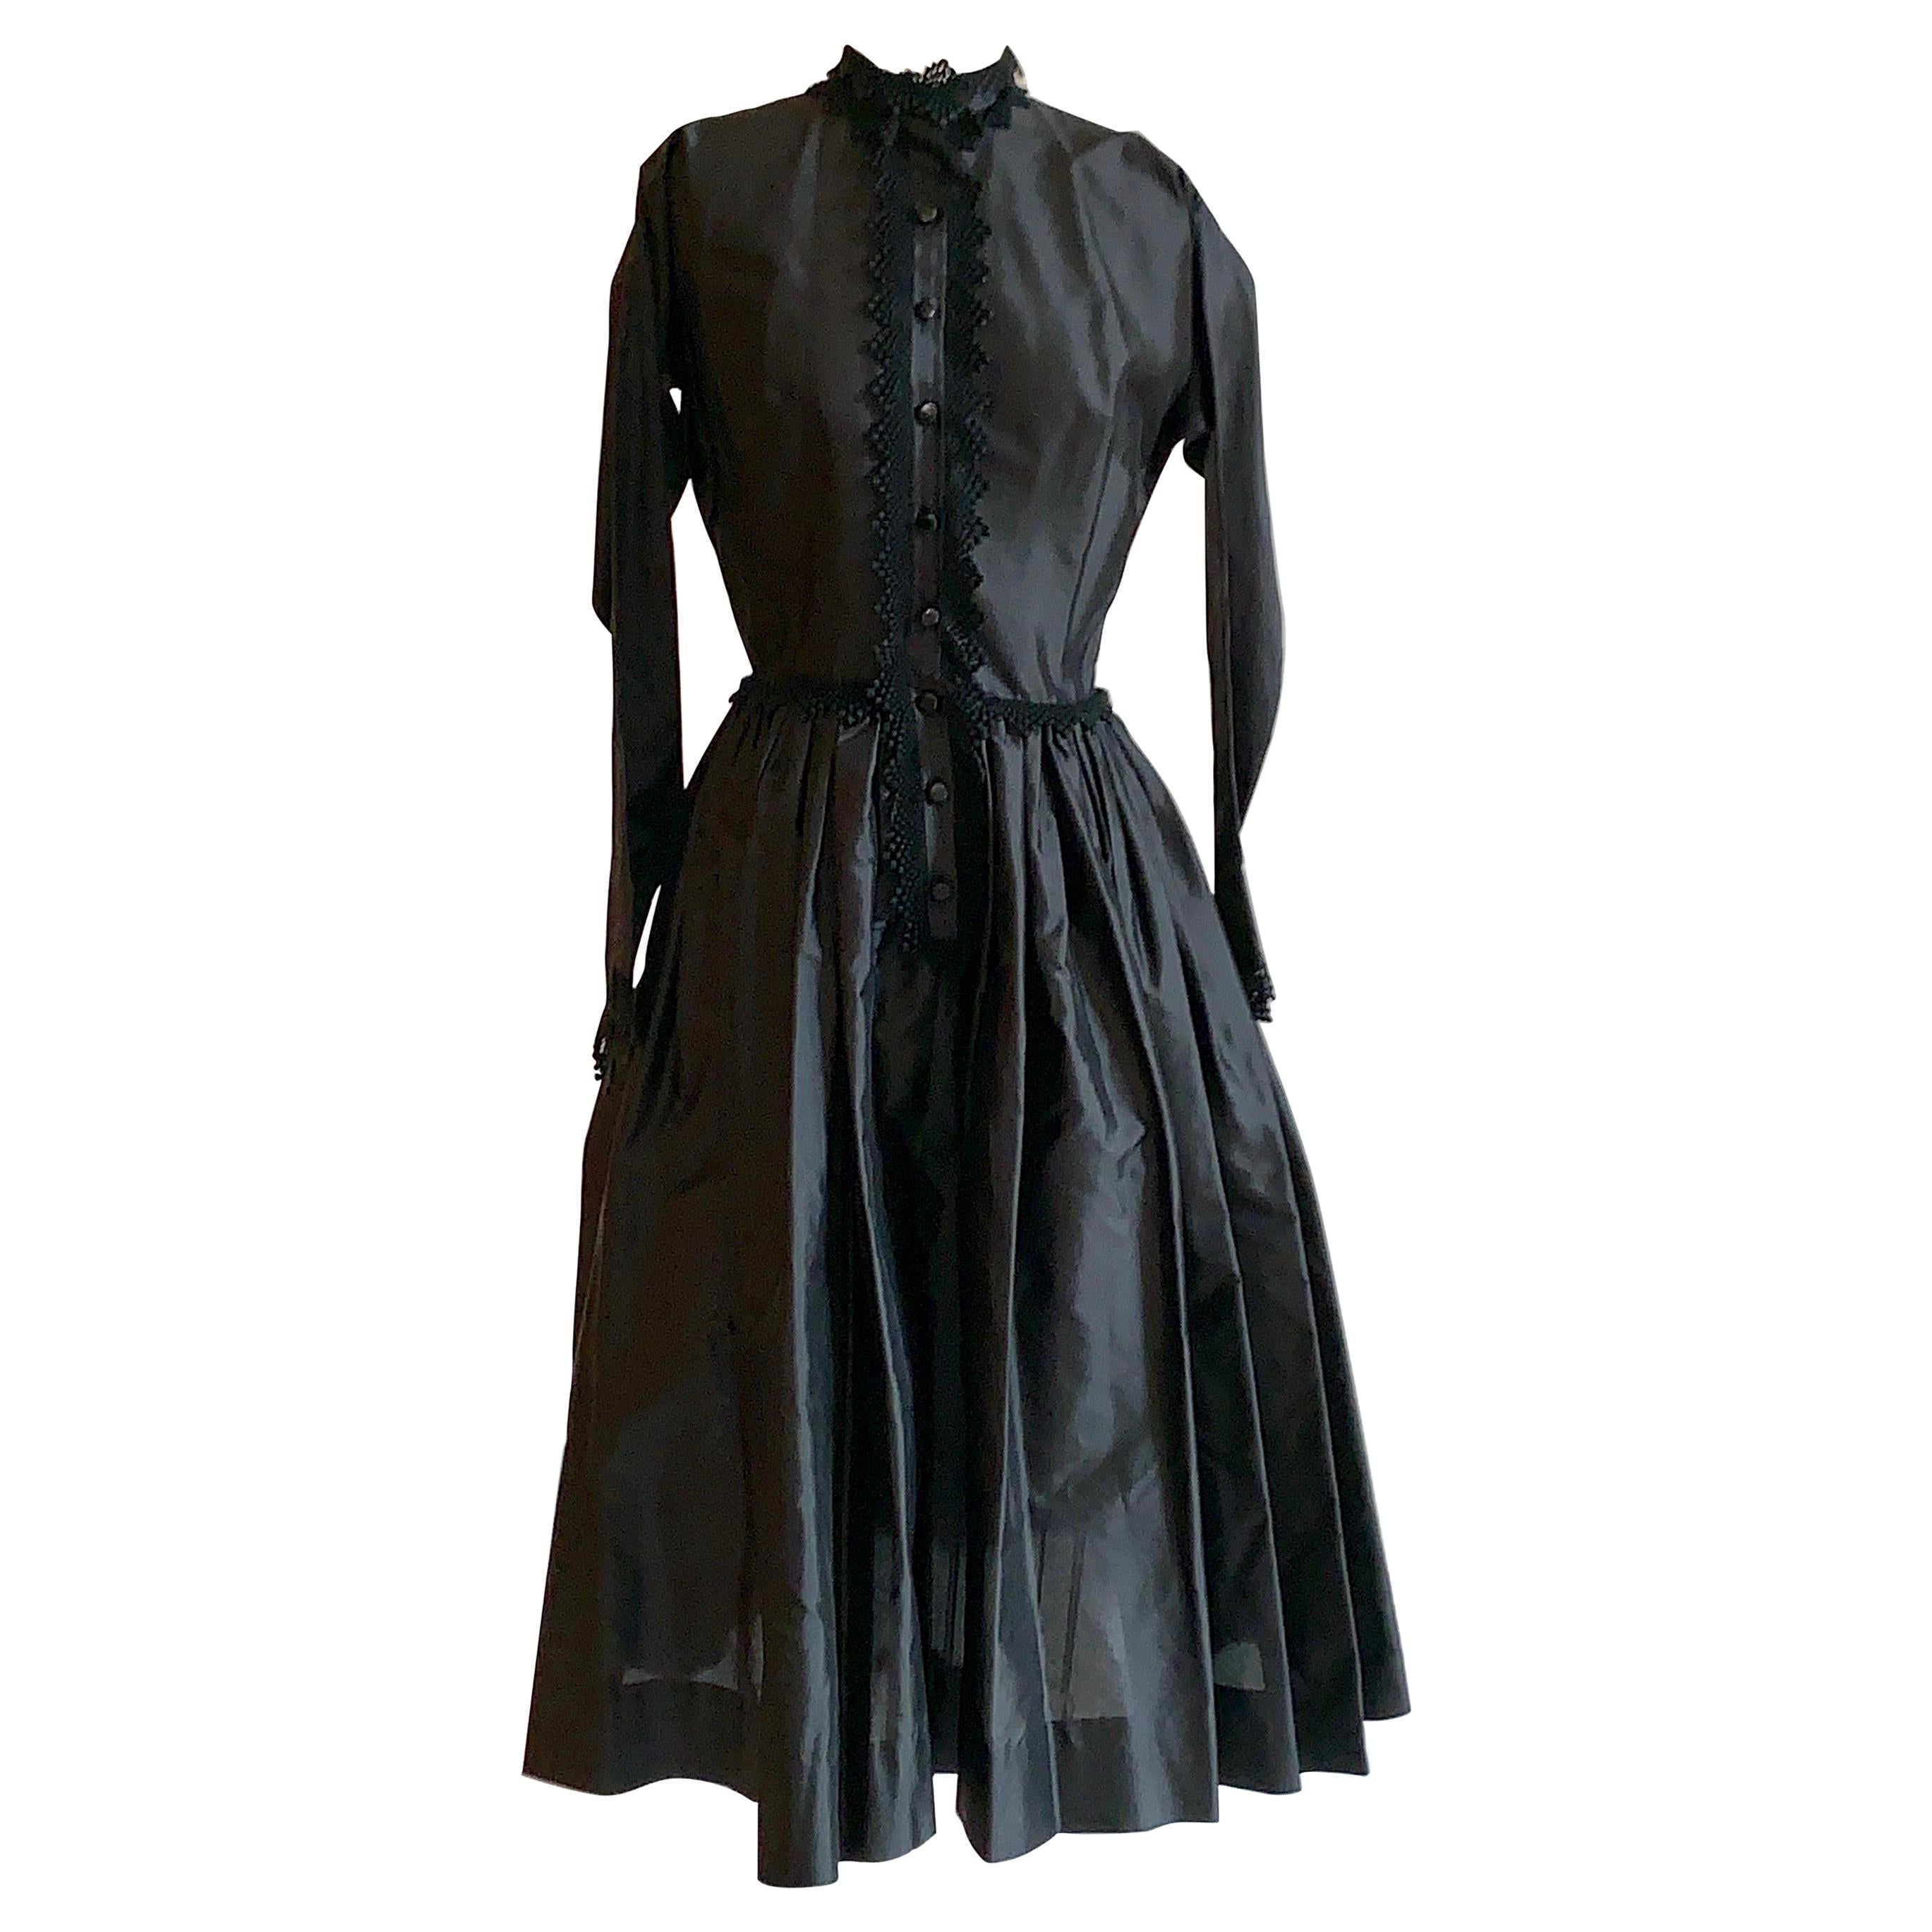 1950s Claire McCardell for Townley Black Button Front Dress with Lace Trim